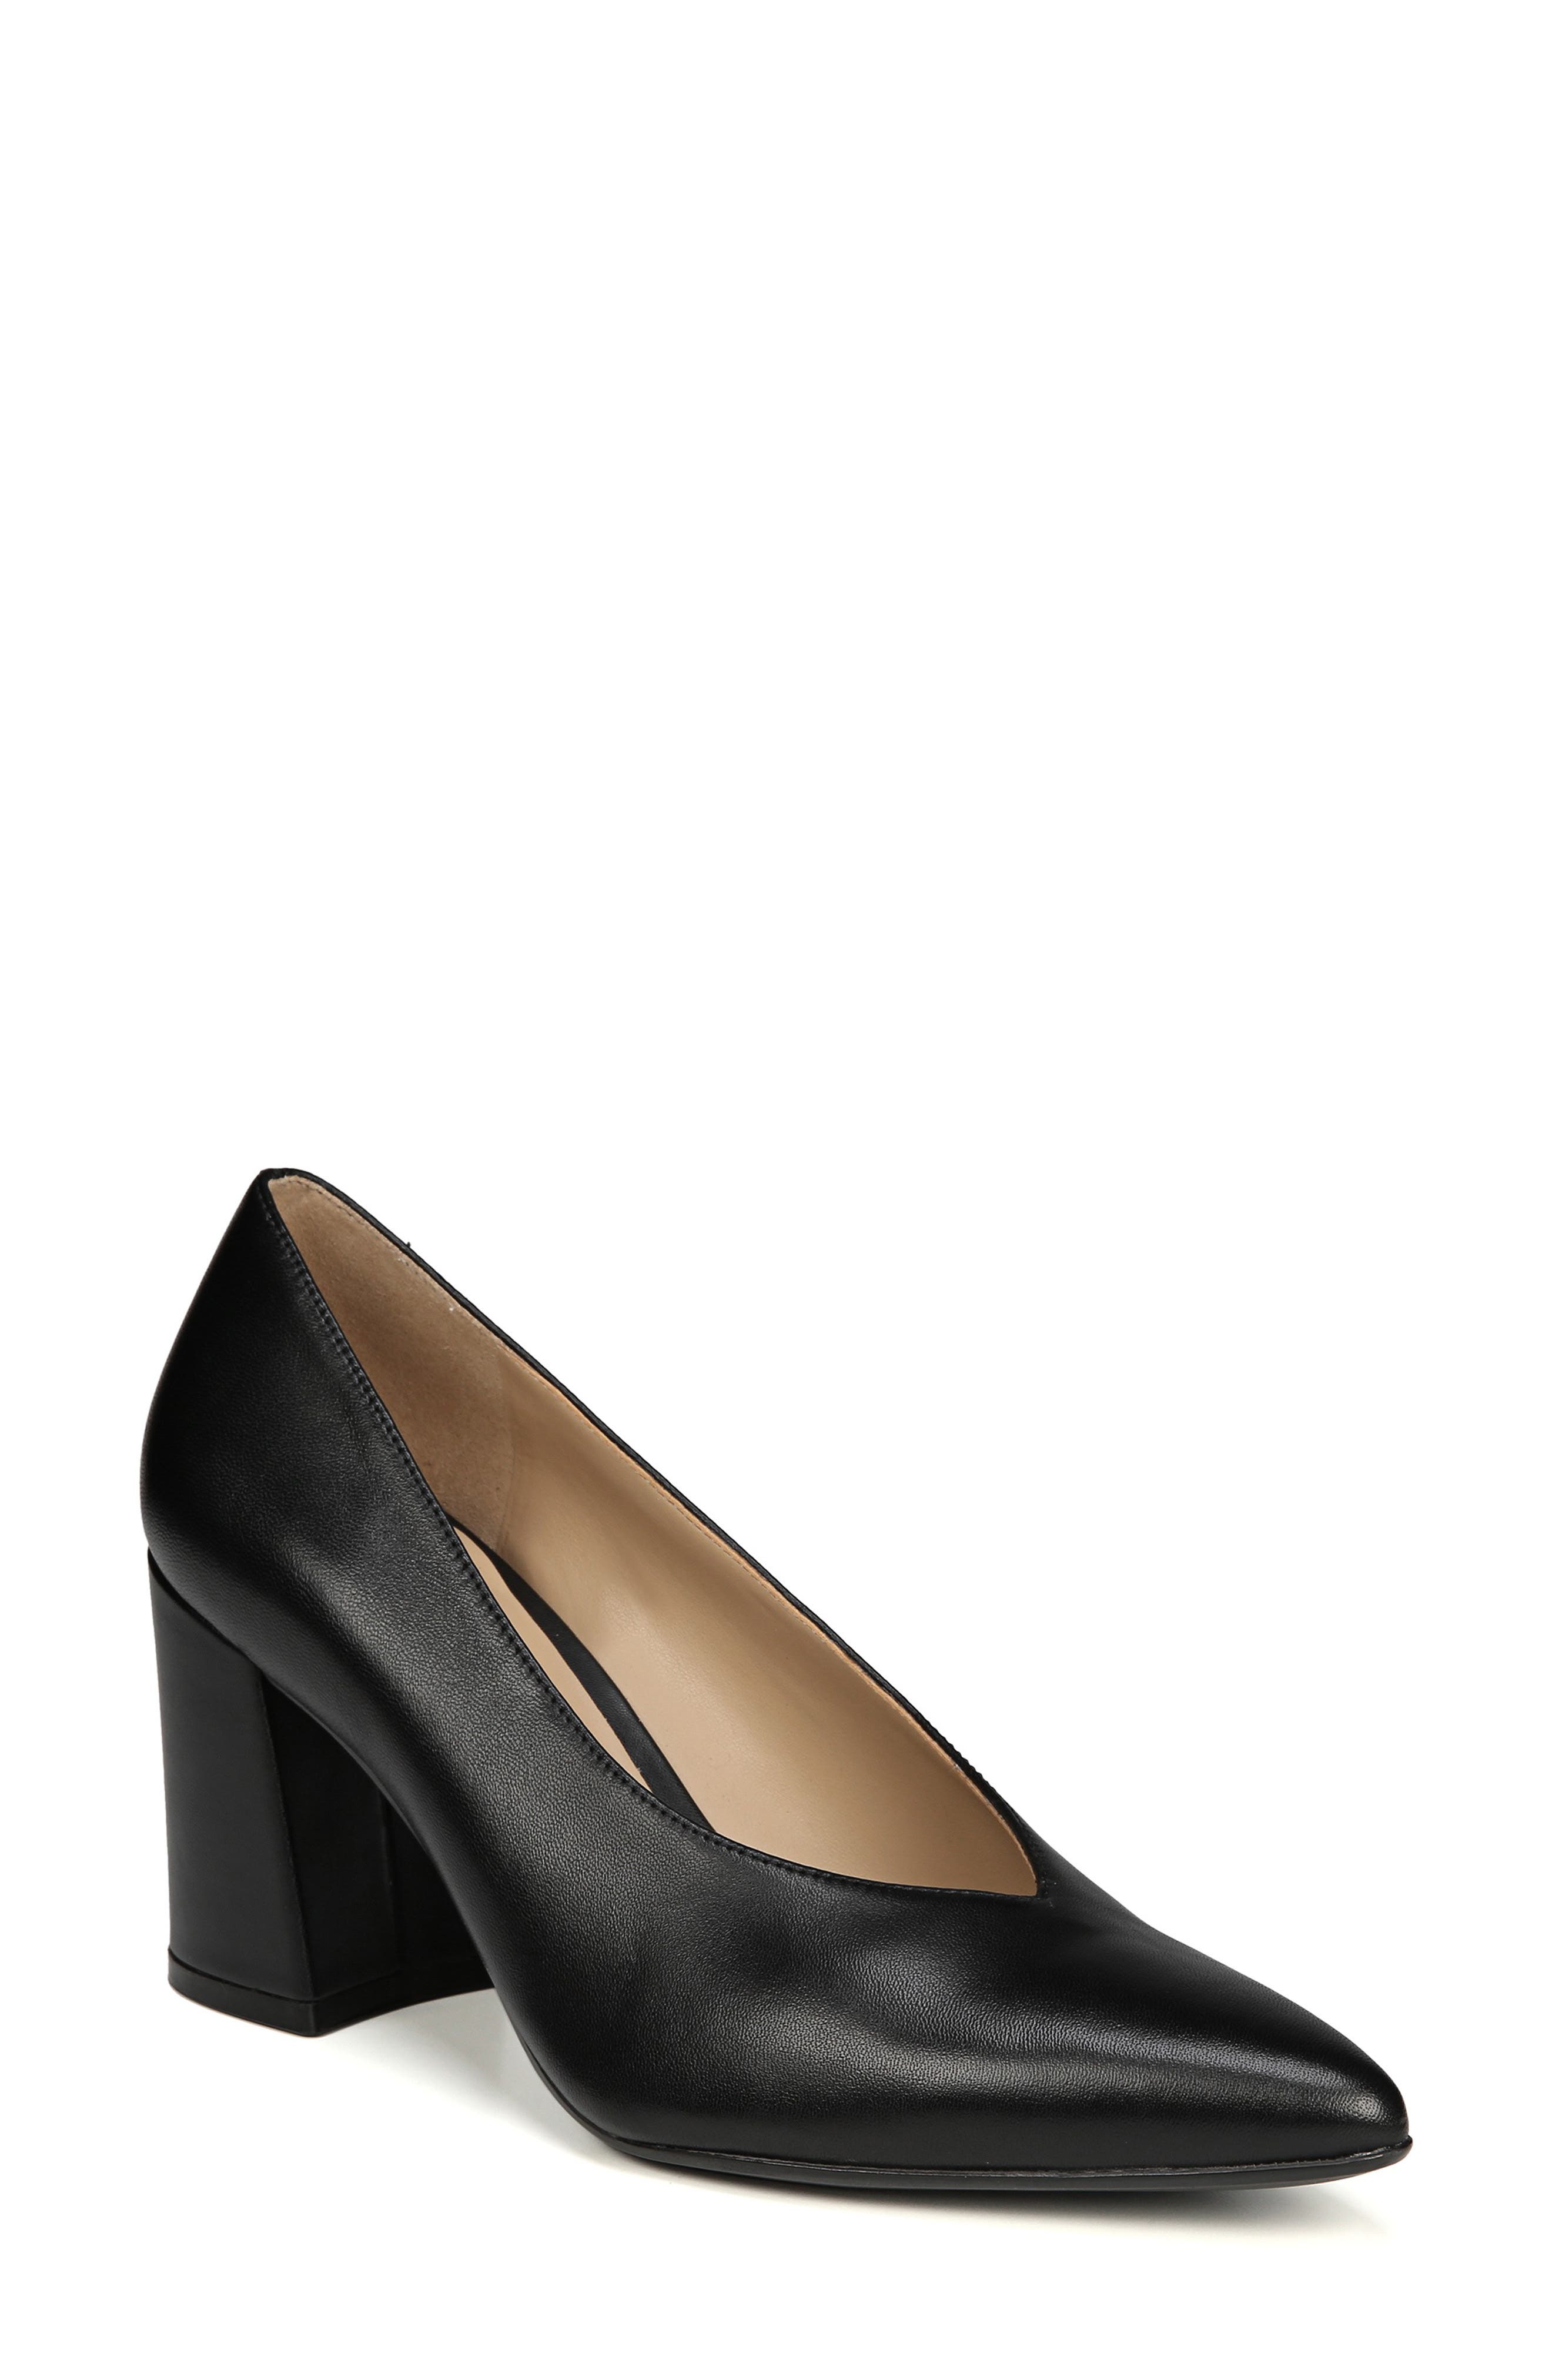 naturalizer hope pointy toe pump